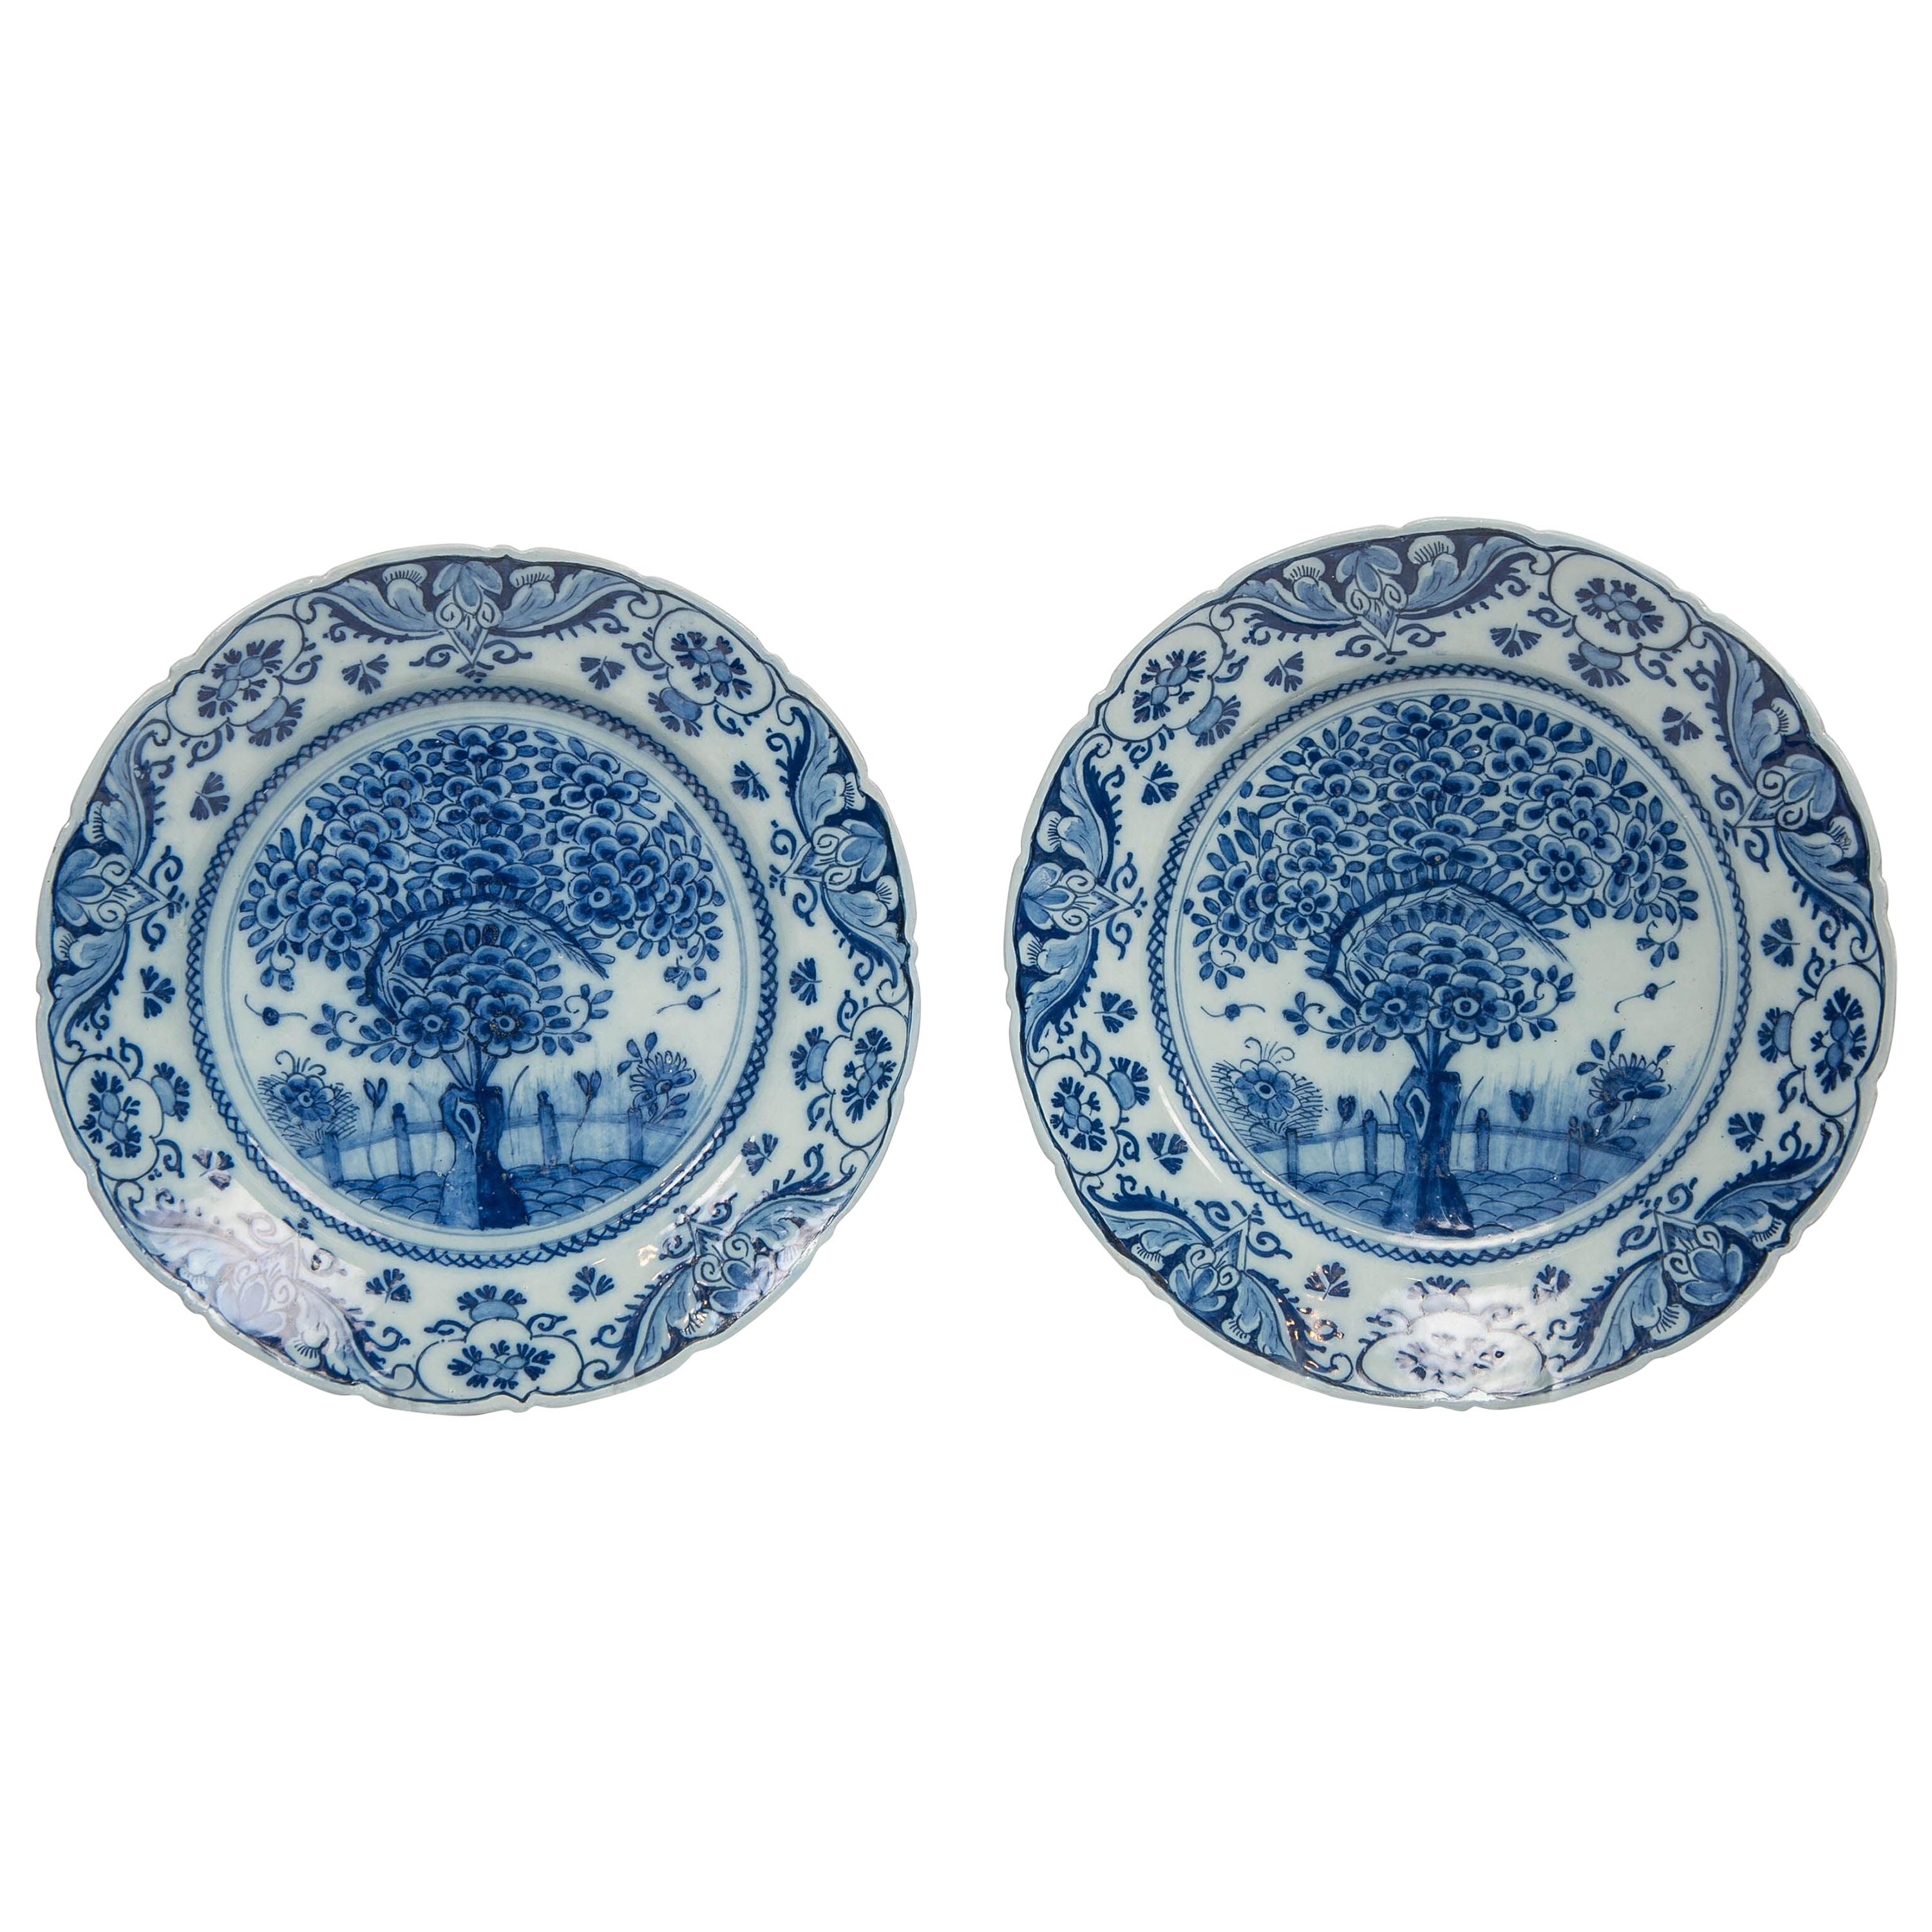 Pair of Delft Blue and White Chargers in the Theeboom Pattern Made circa 1770